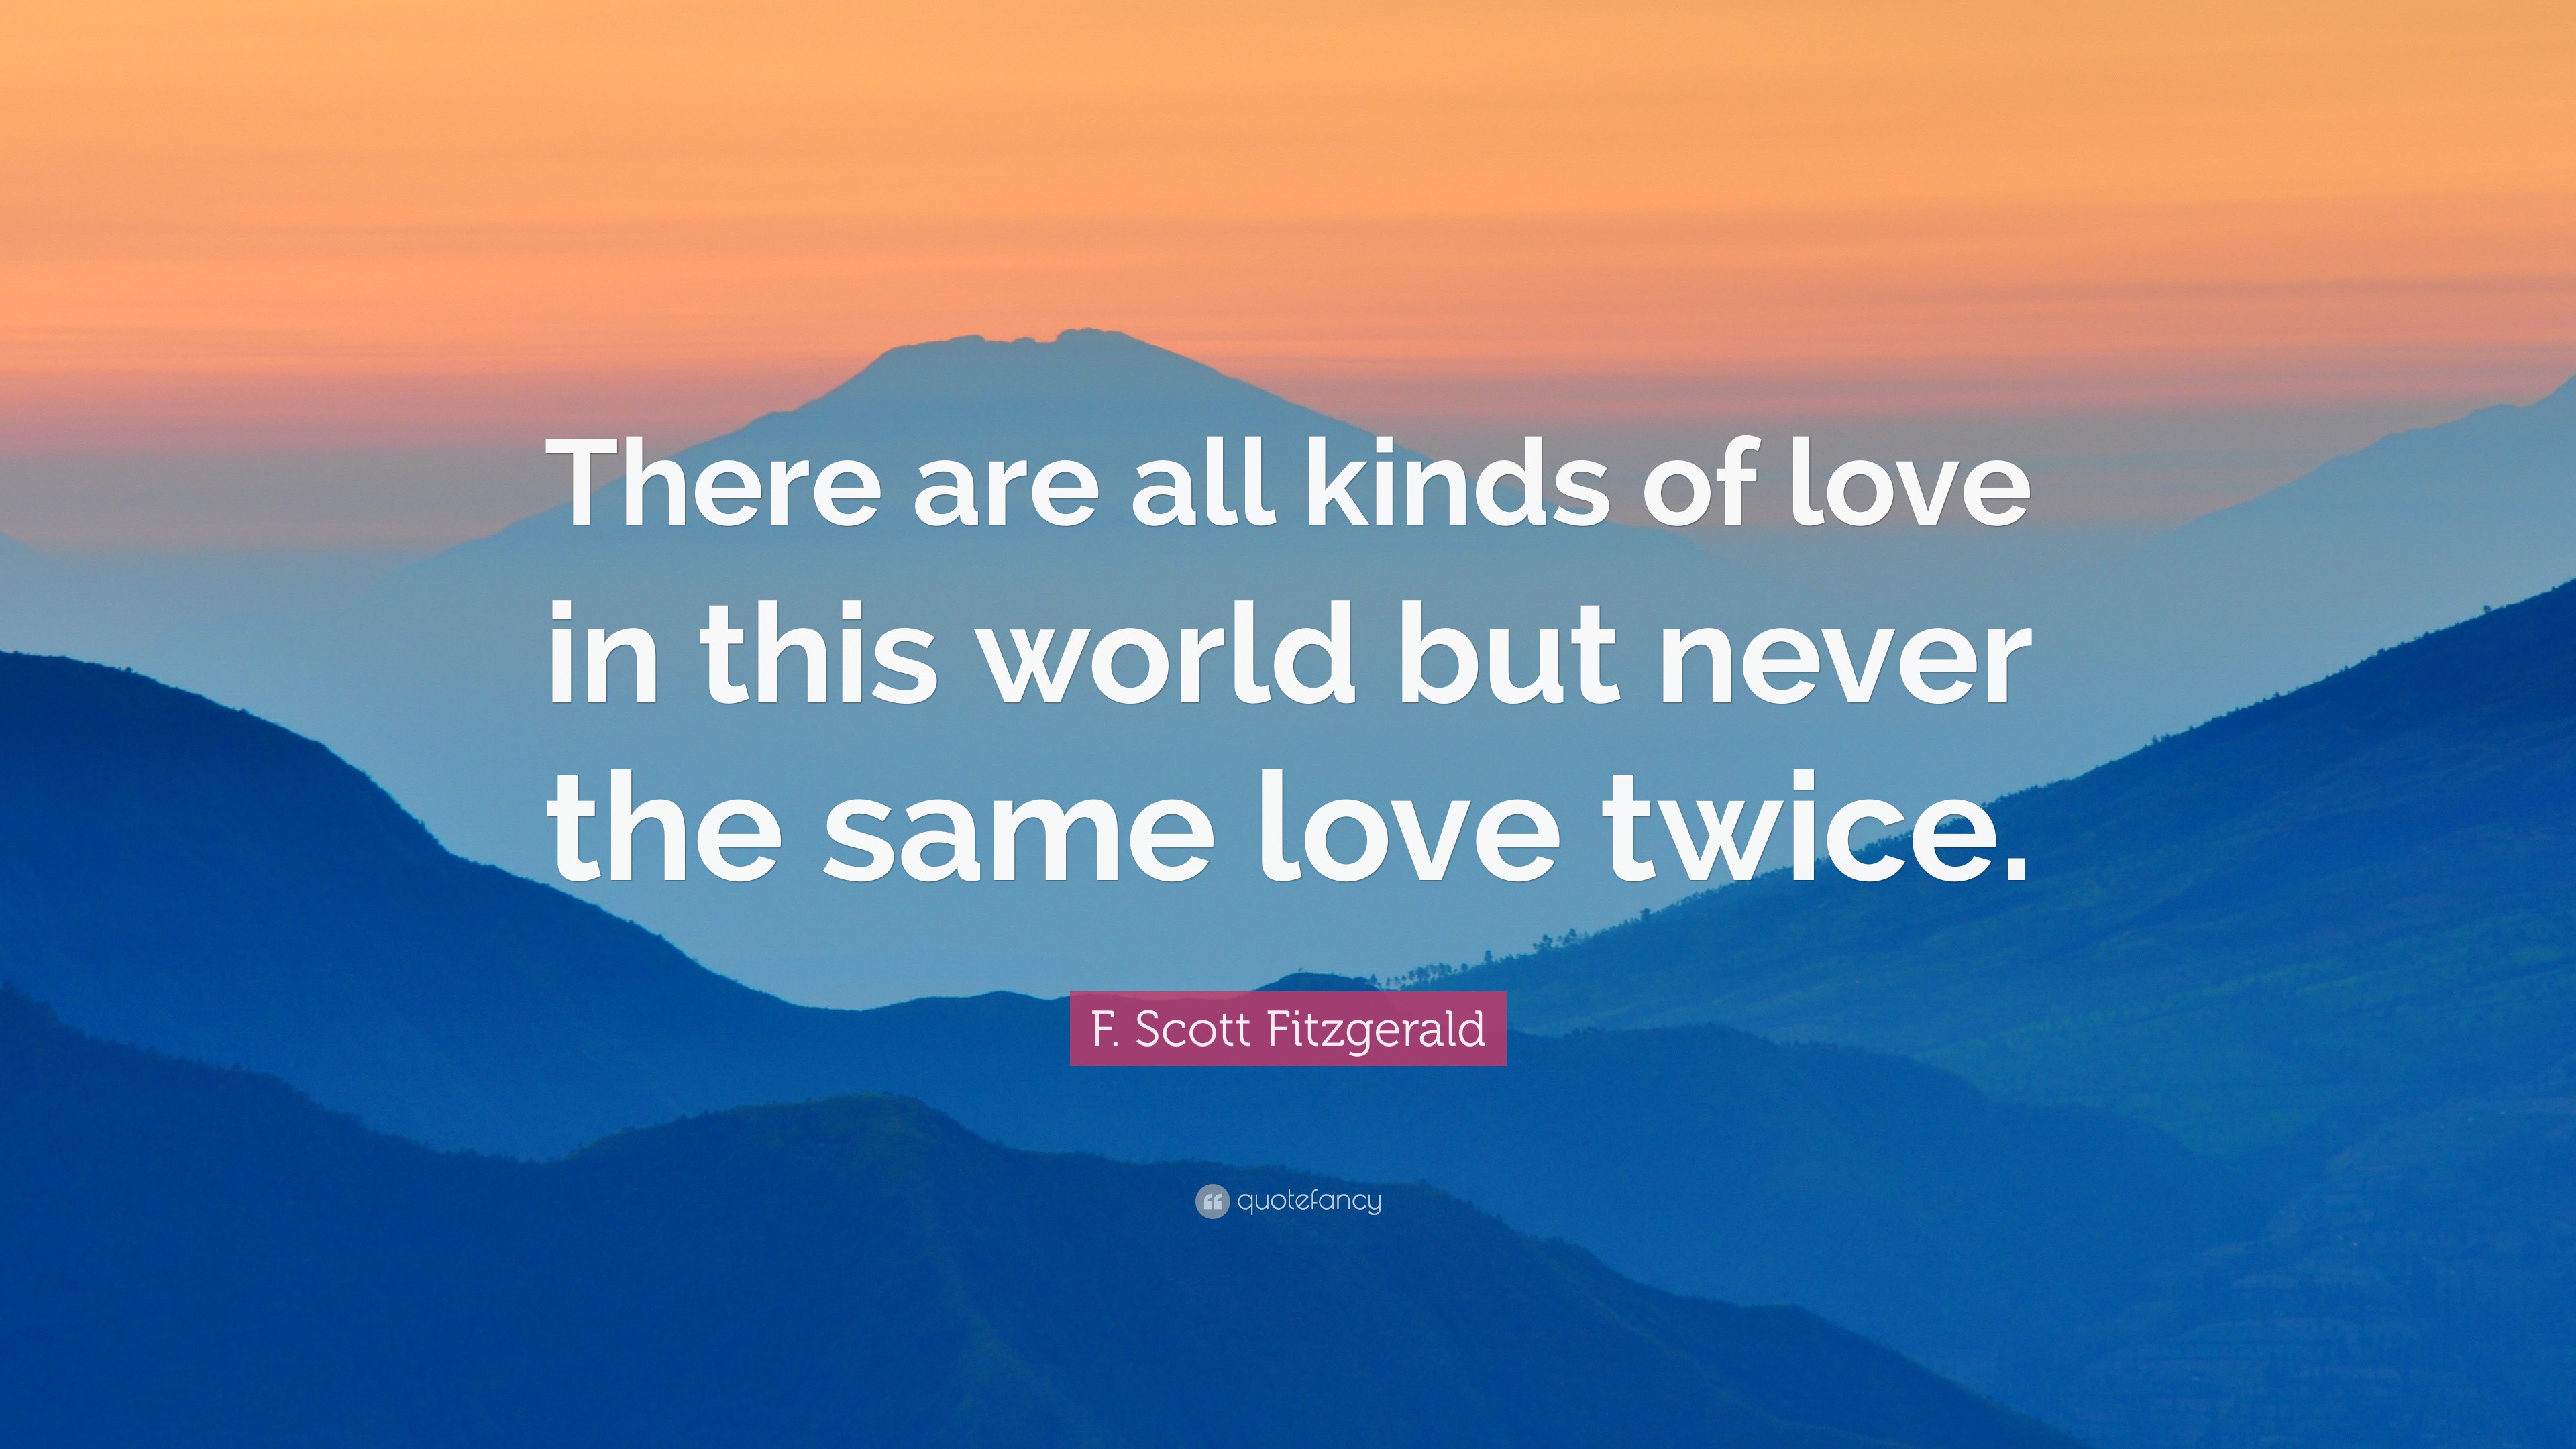 F. Scott Fitzgerald Quote: “There are all kinds of love in this world ...